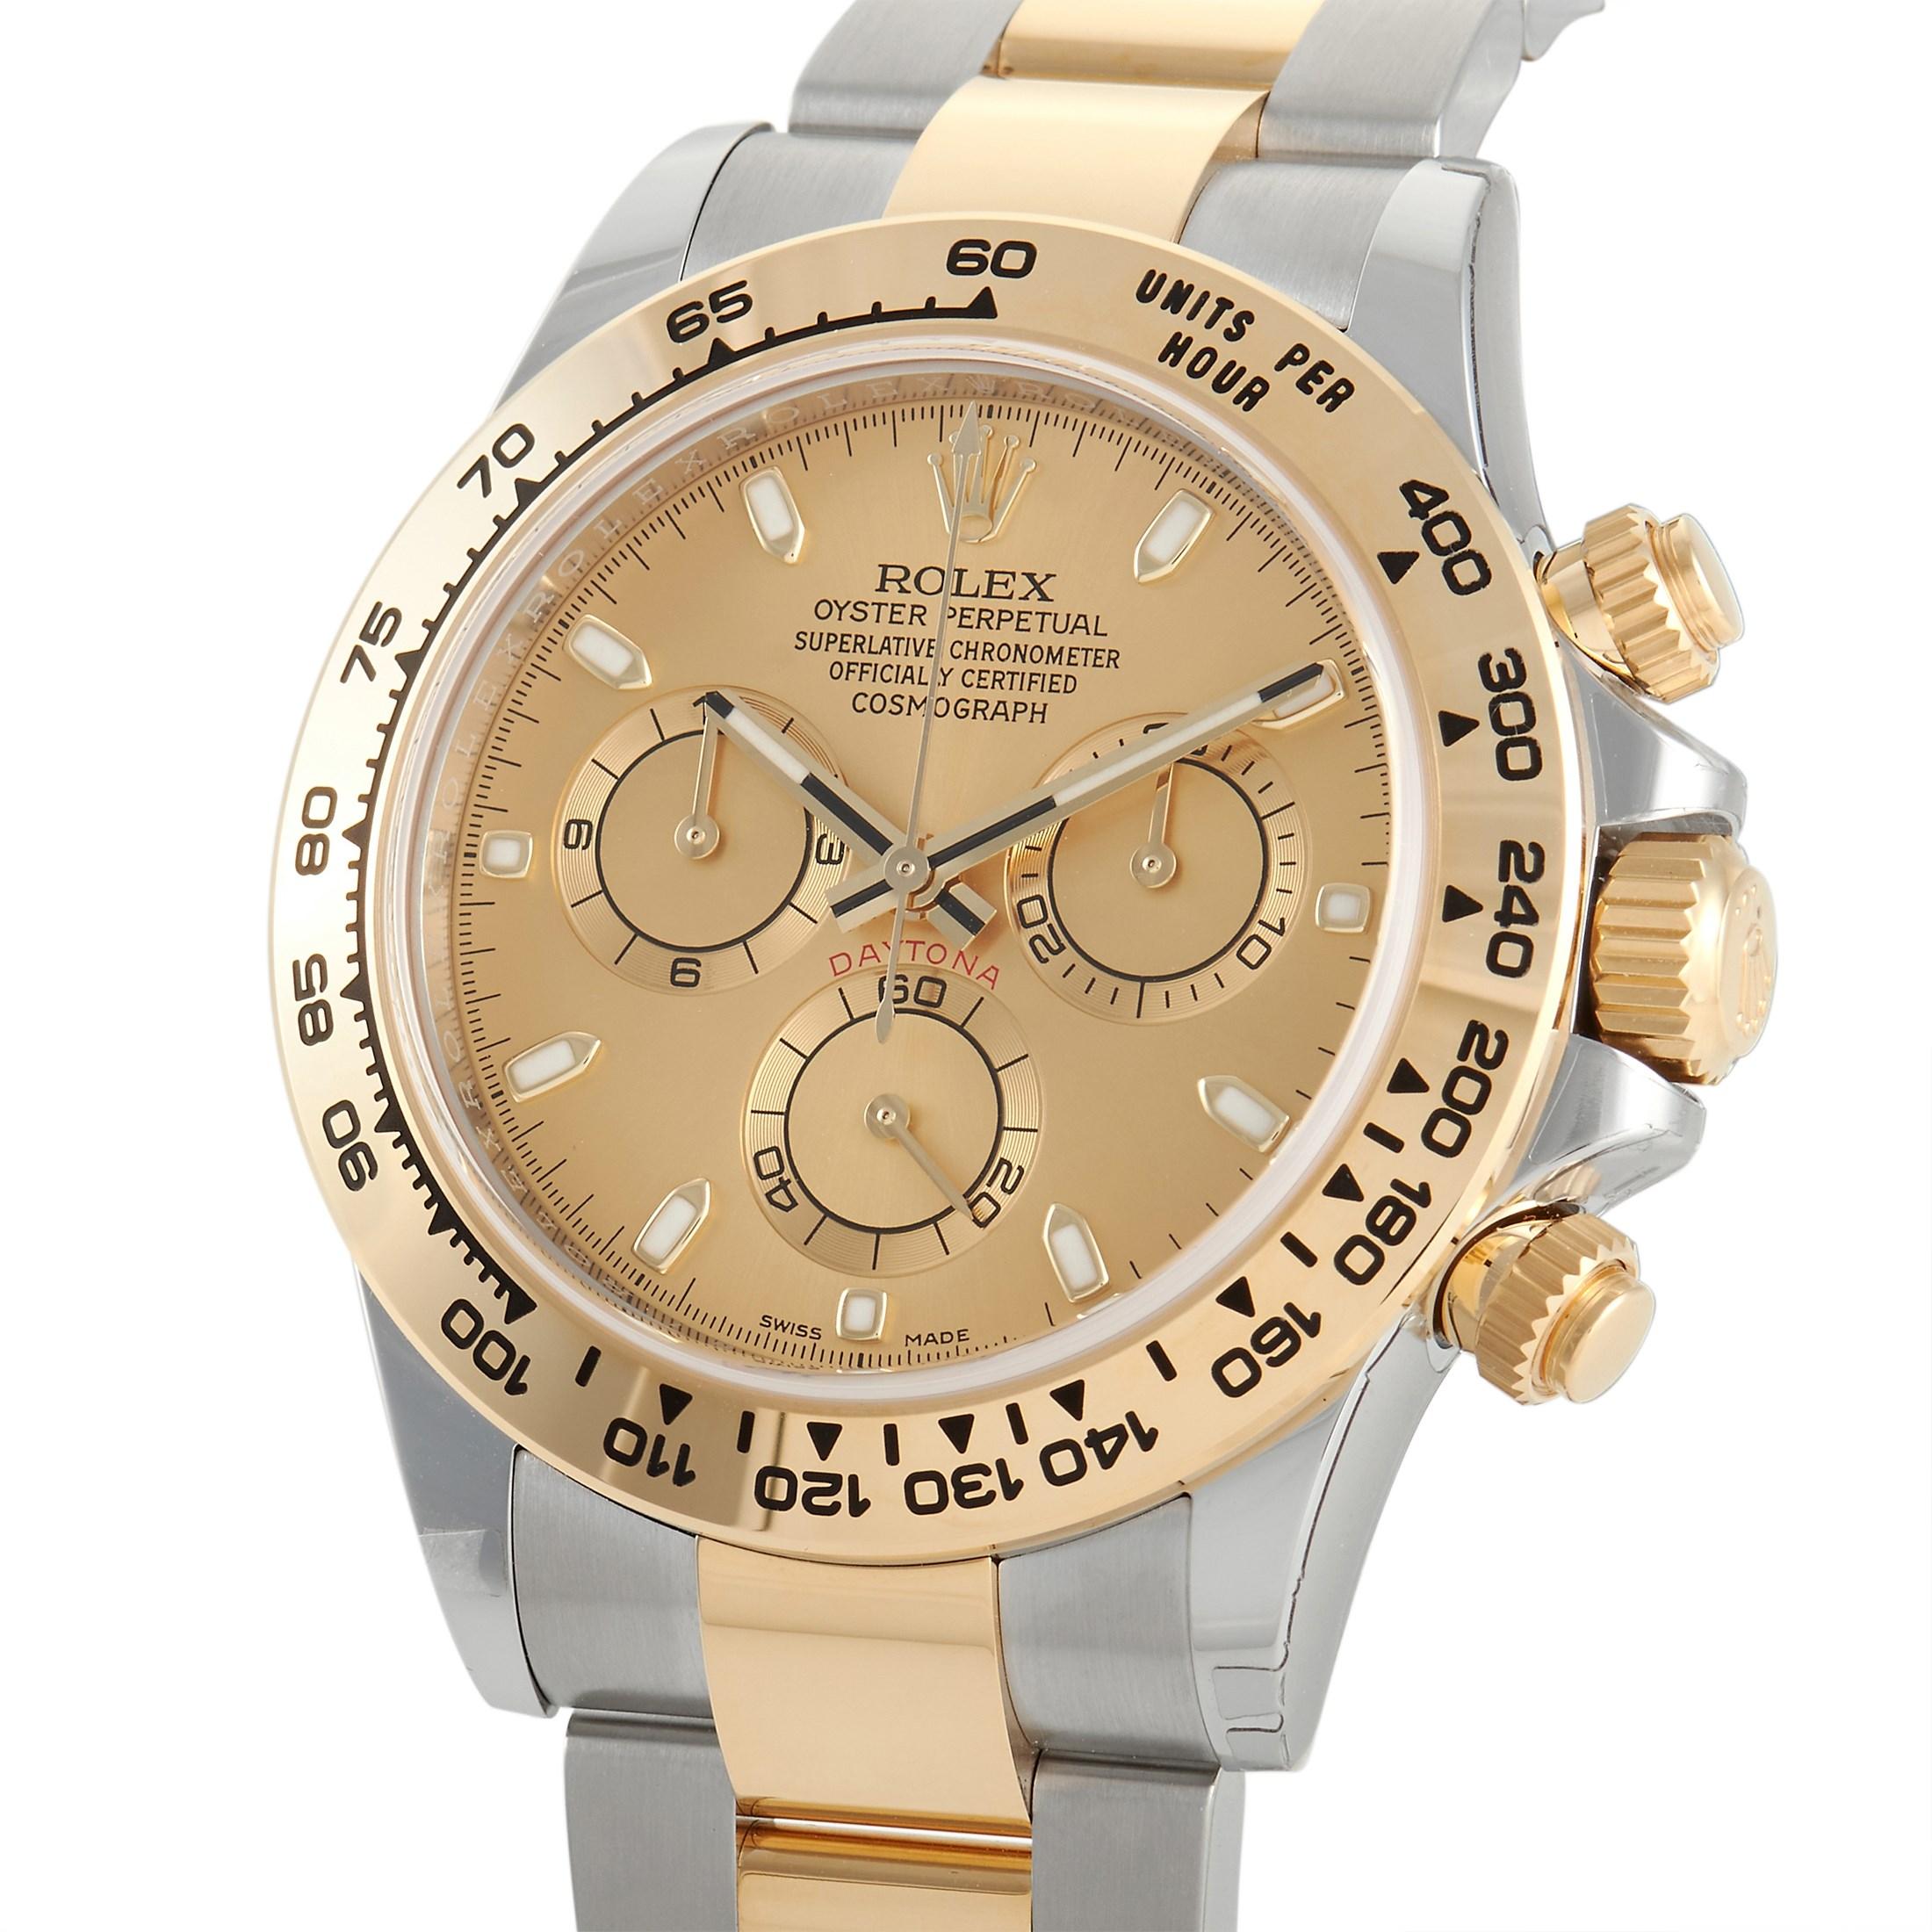 The Rolex Cosmograph Daytona Watch, reference number 116503-0003, is a luxury timepiece that celebrates the brand’s storied history. 

Set upon a Rolex Oyster bracelet with 18K yellow gold center links, this watch’s 40mm stainless steel case